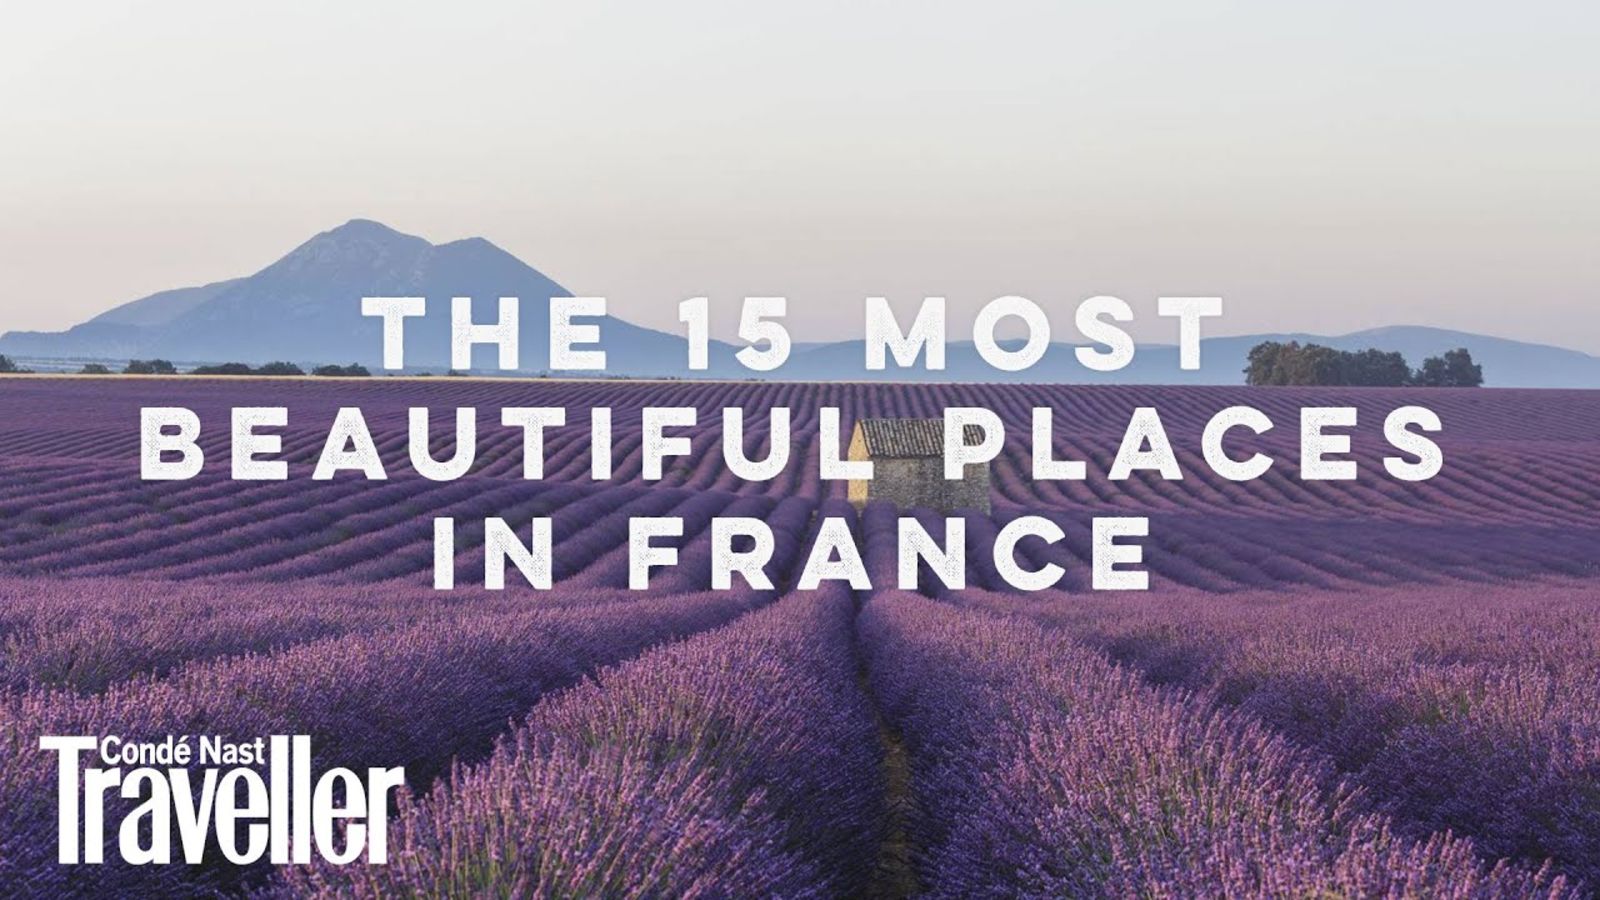 The most beautiful places in France